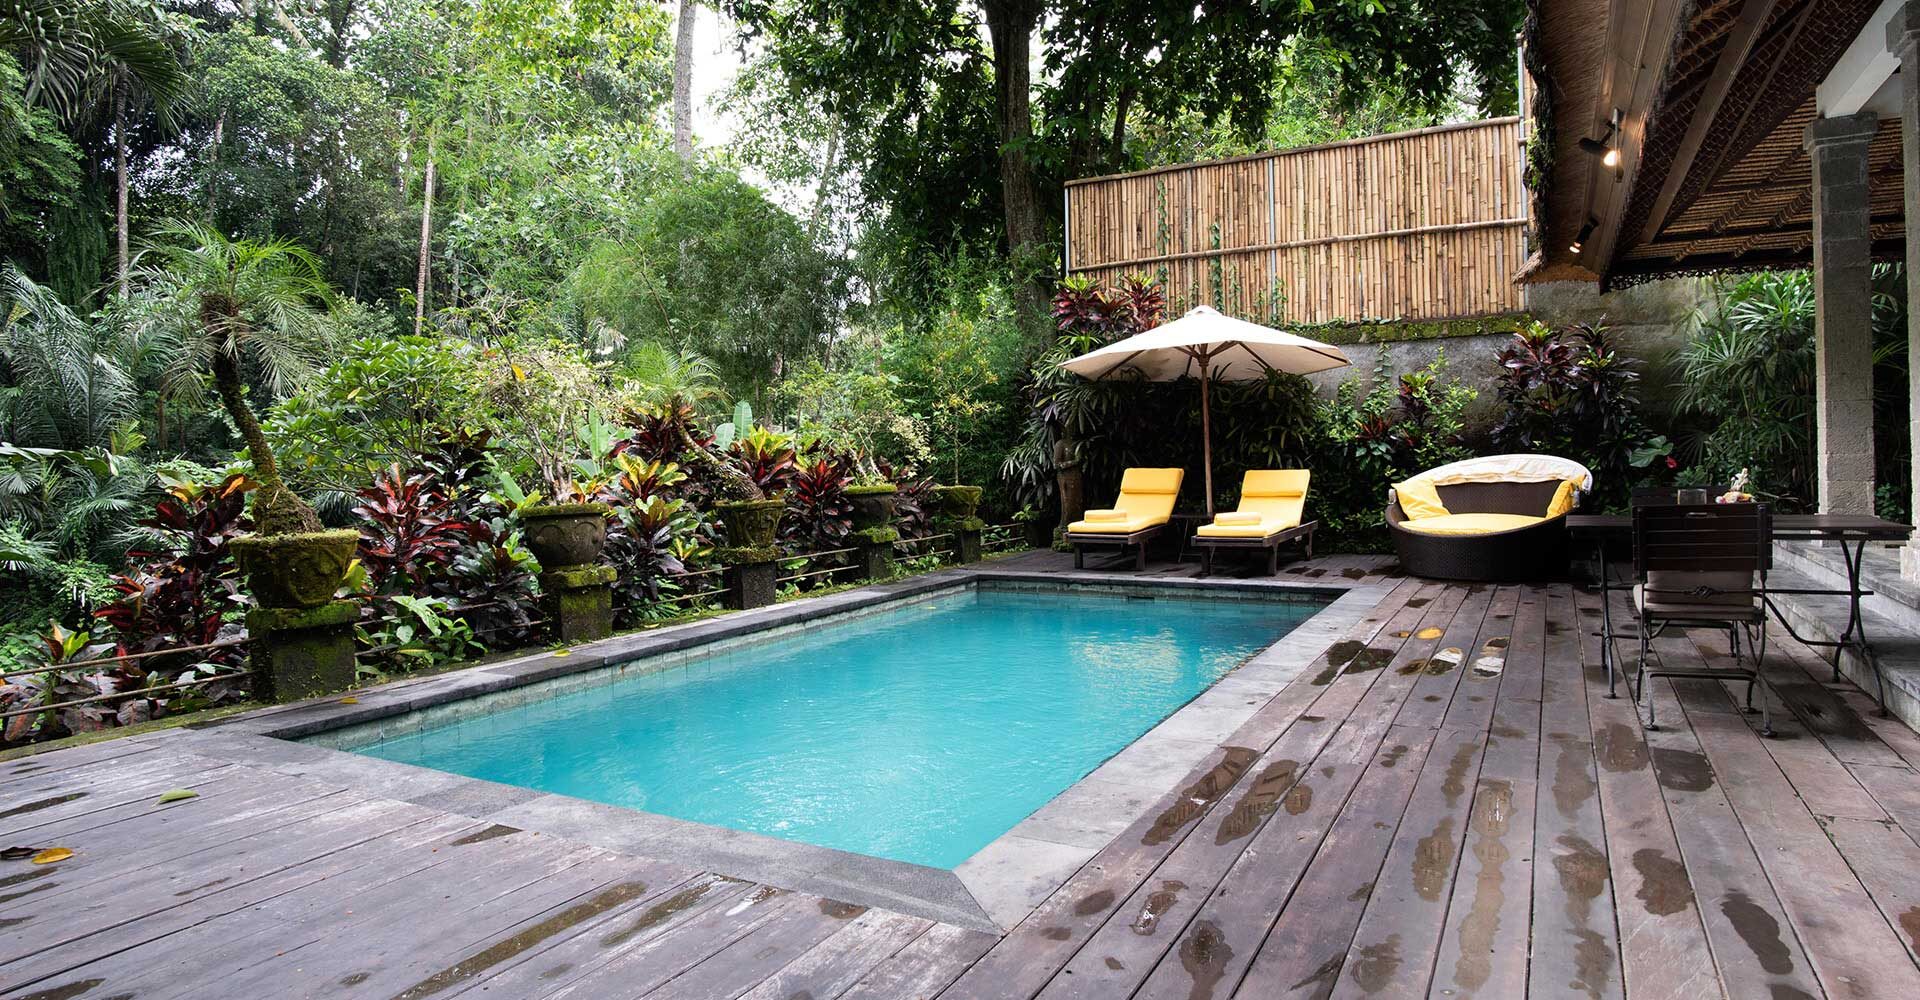 Large pool and outdoor decking area in one of Sukavati's luxury private villas.